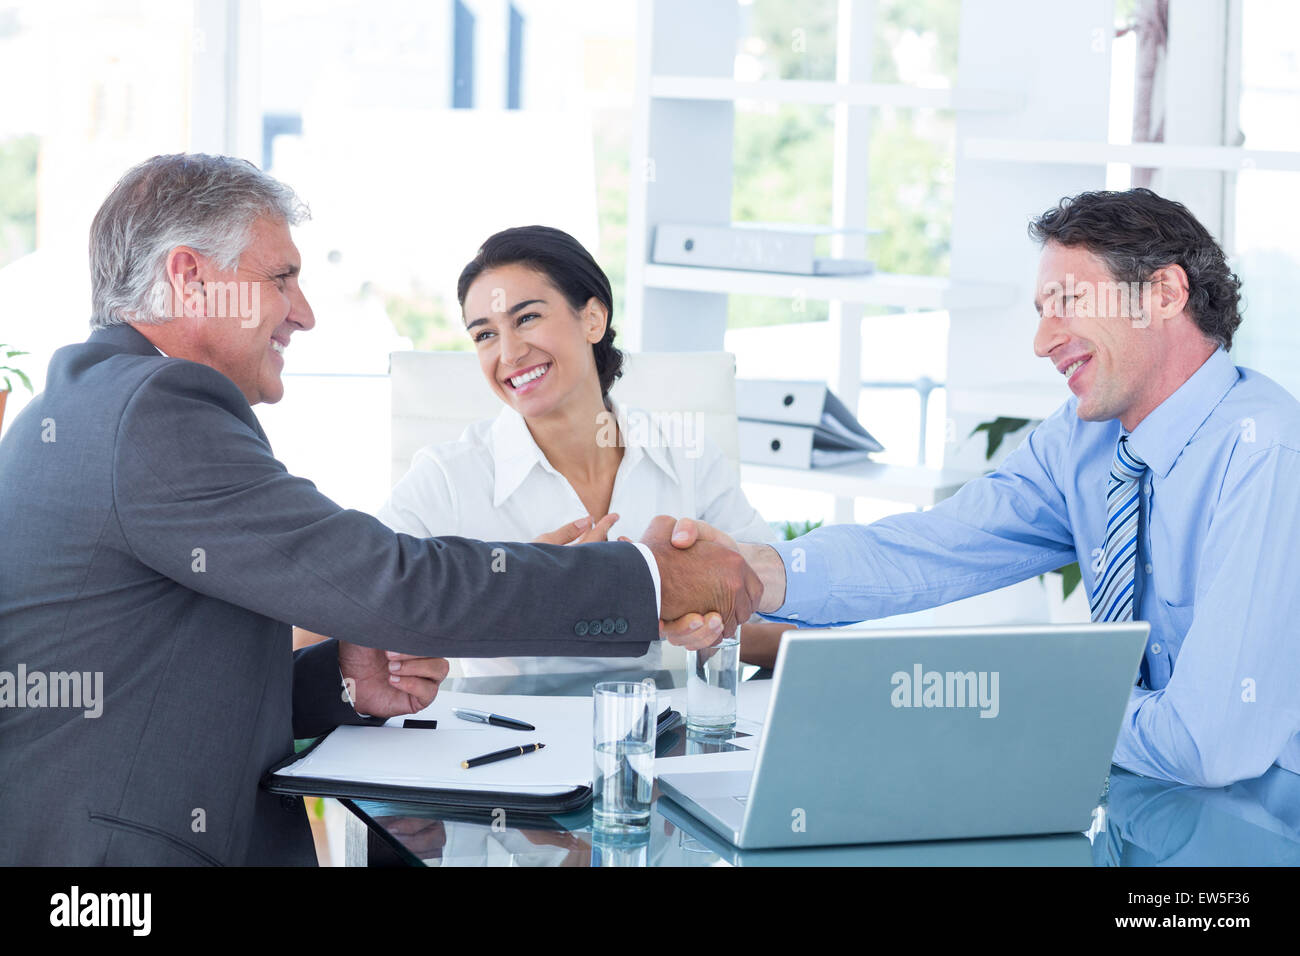 Business people reaching an agreement Stock Photo